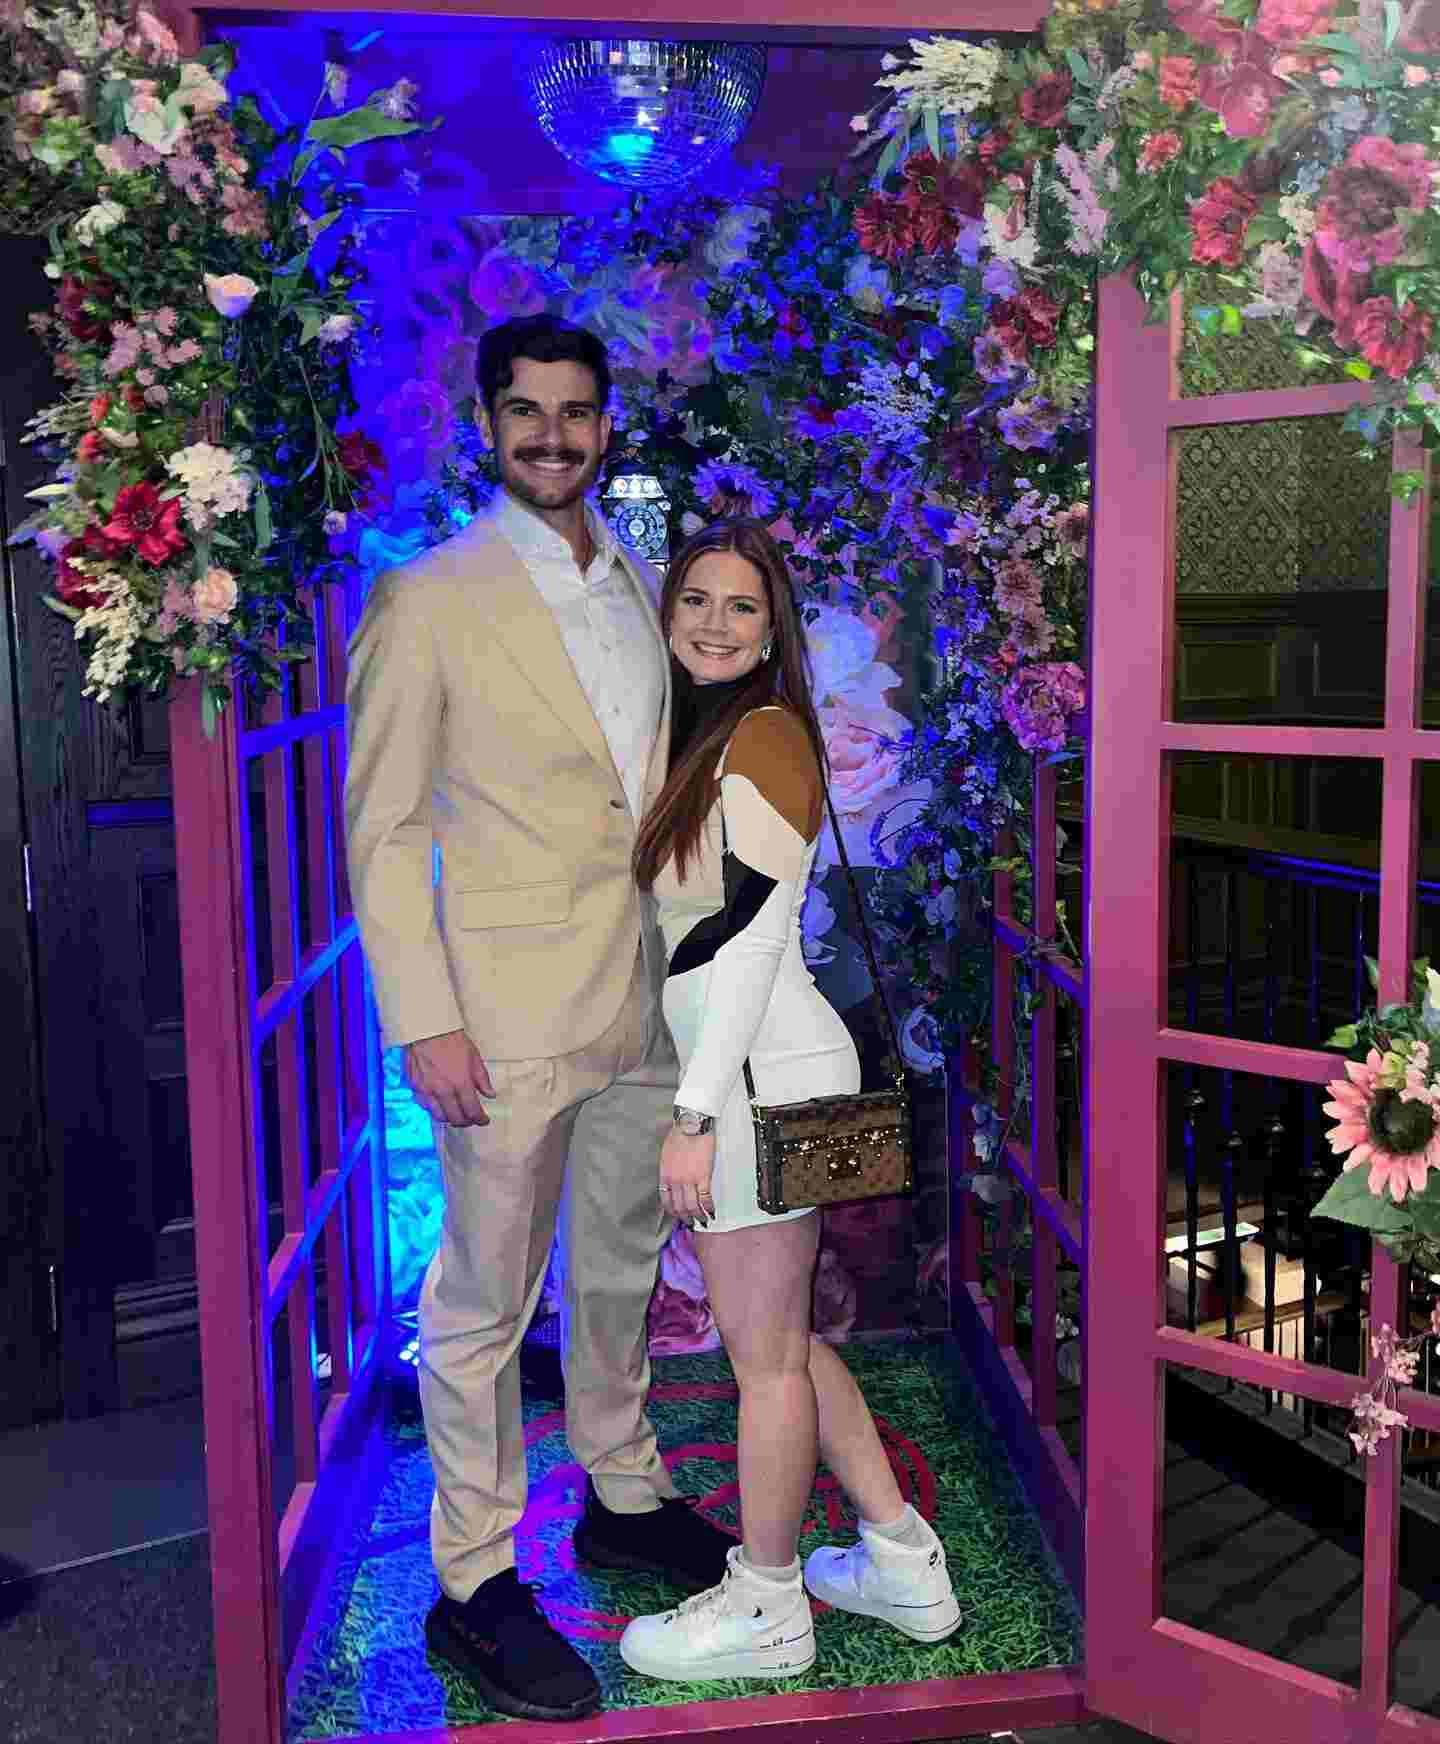 Know All About Dylan Cease’s Girlfriend Rebekah Haynes!